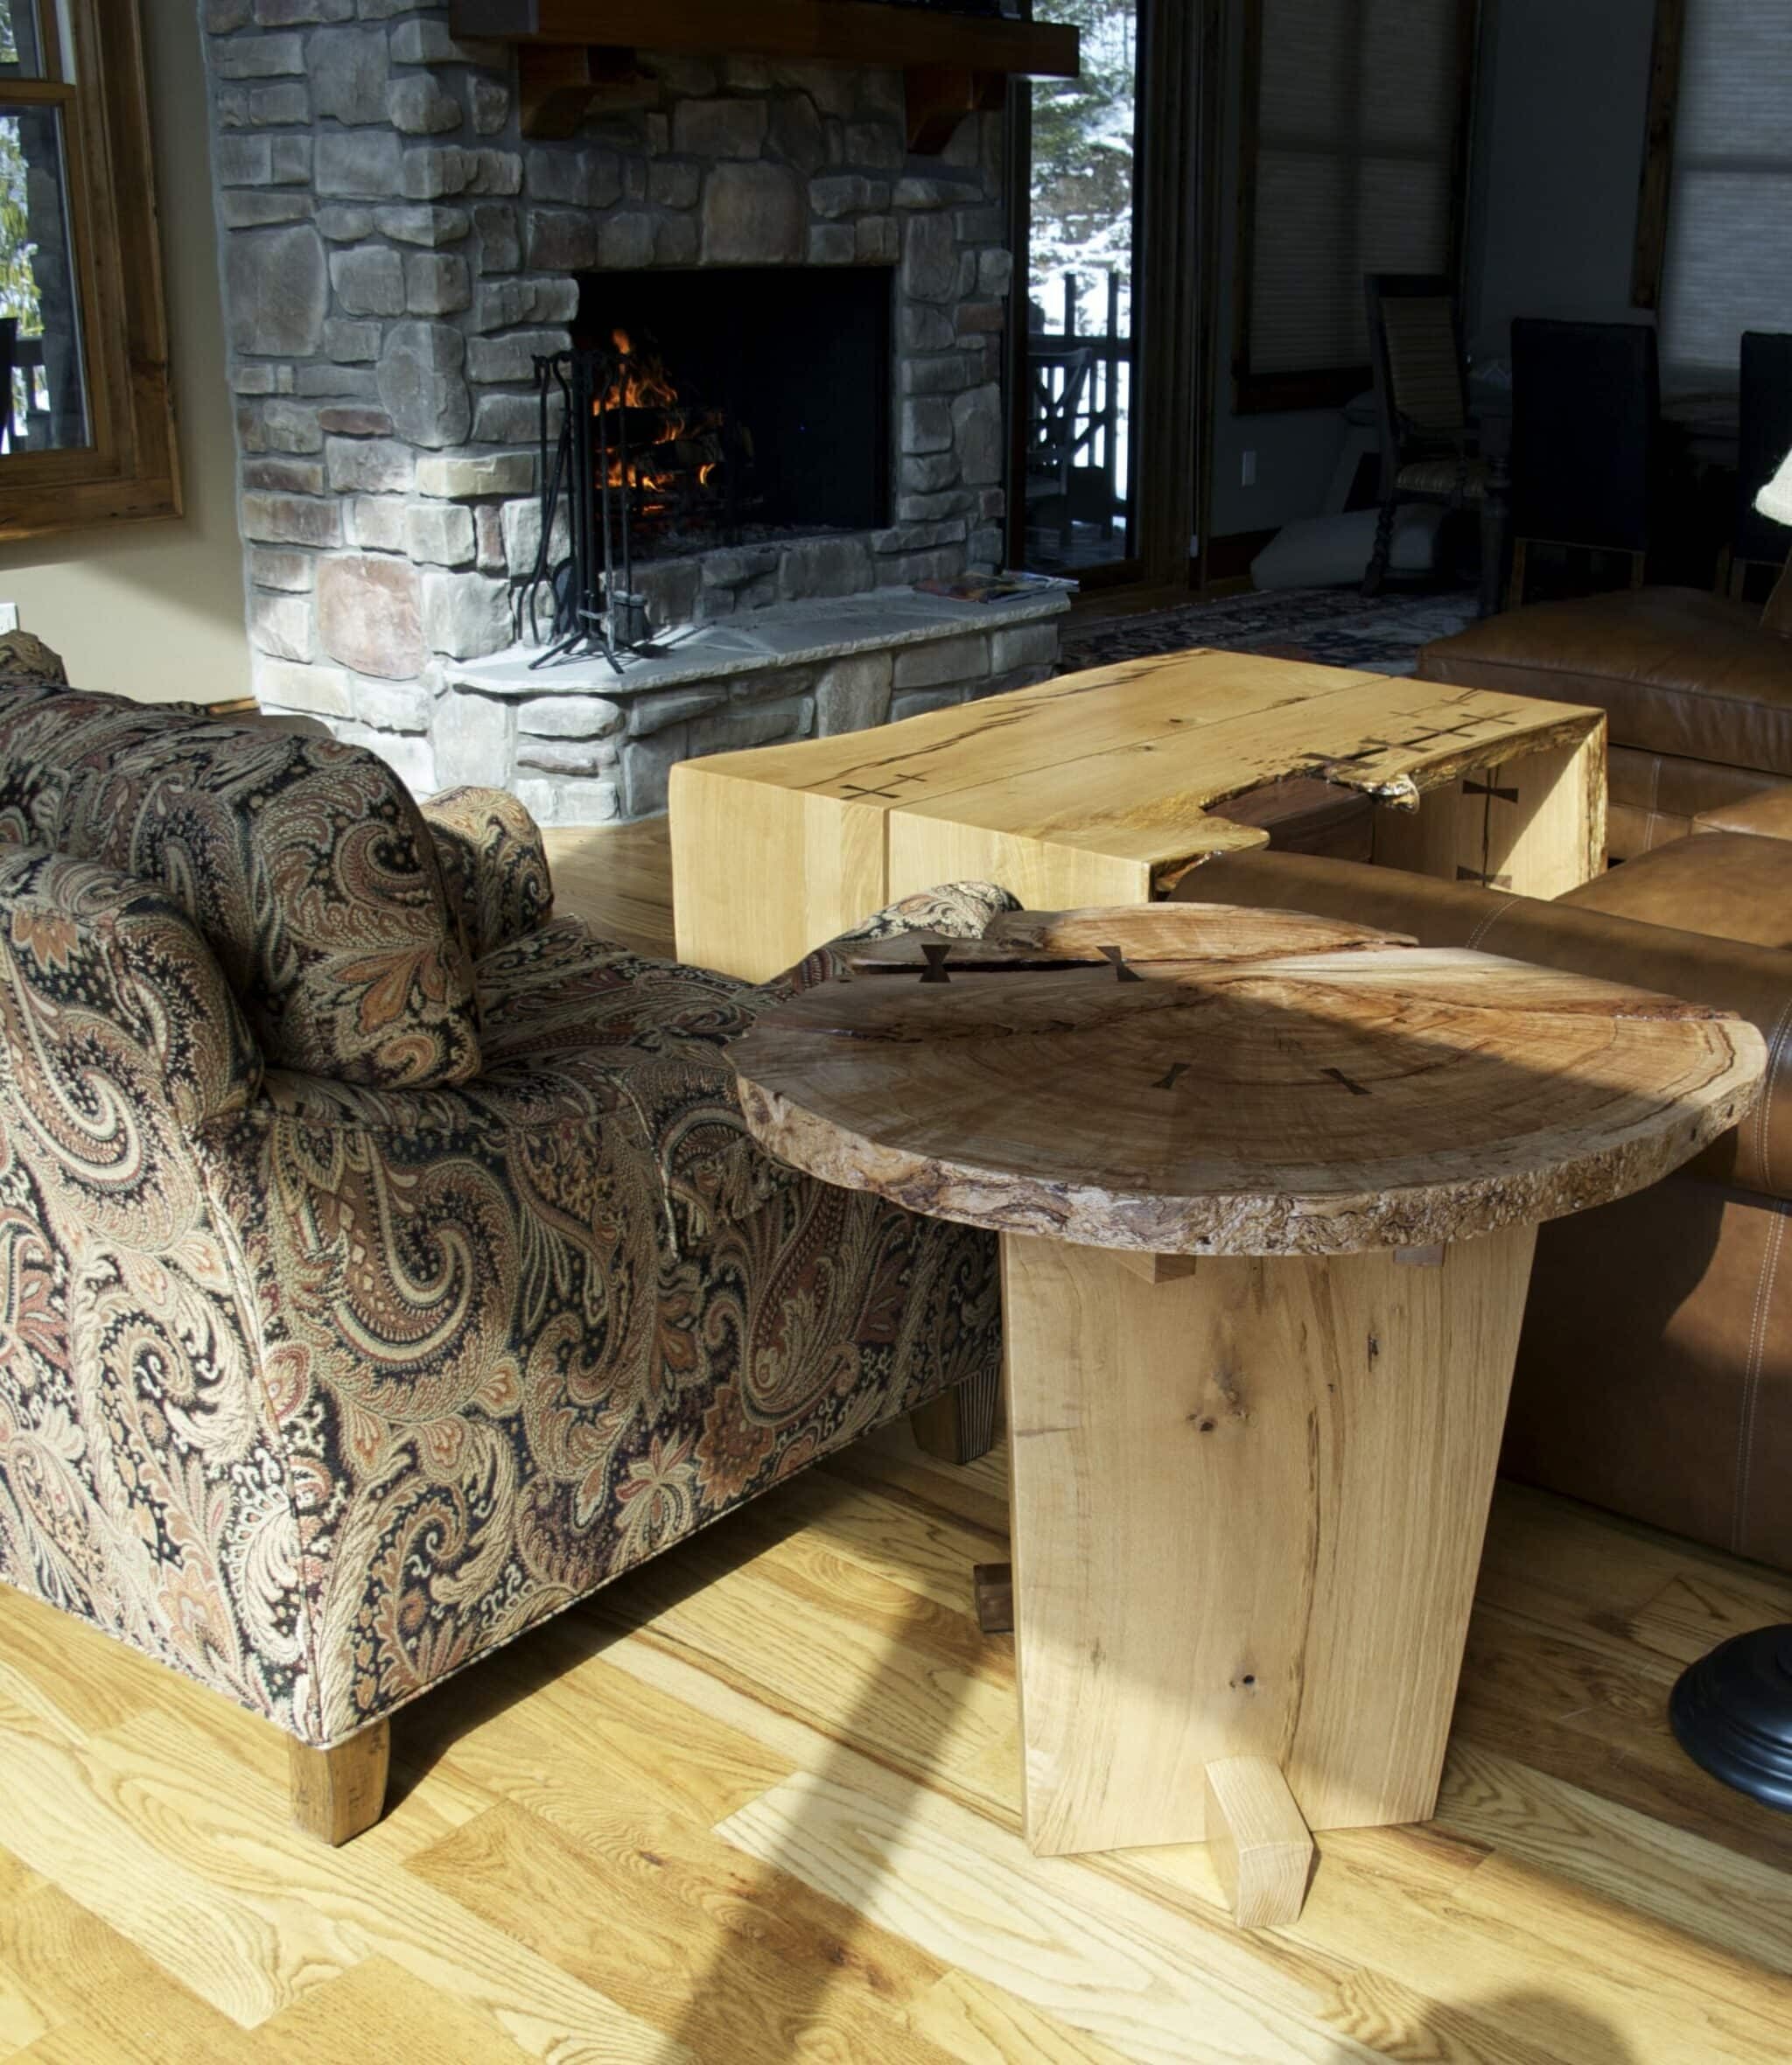 wood slab projects & ideas live edge table designs